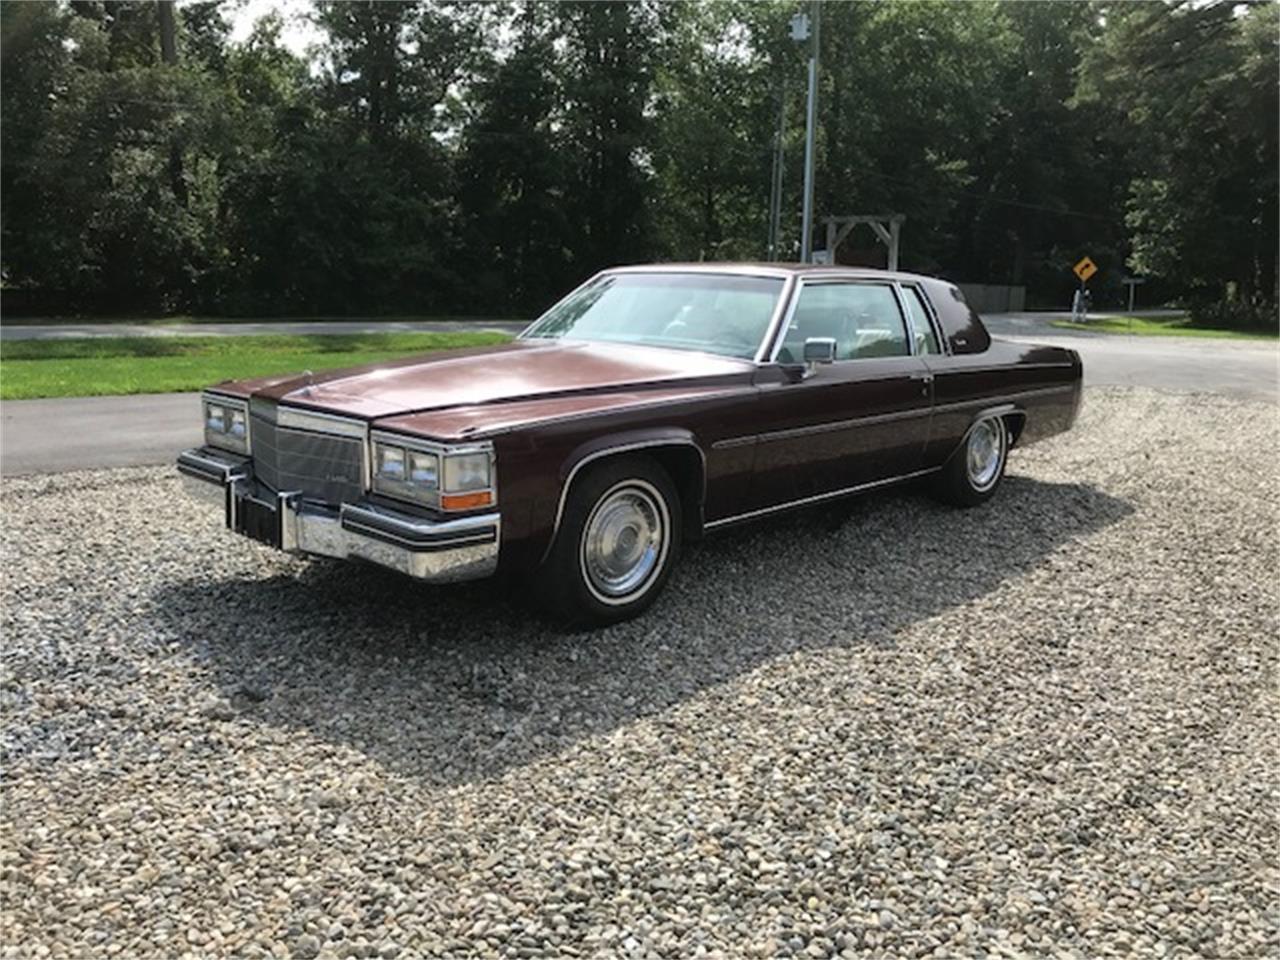 1984 cadillac coupe deville for sale classiccars com cc 1134798 1984 cadillac coupe deville for sale